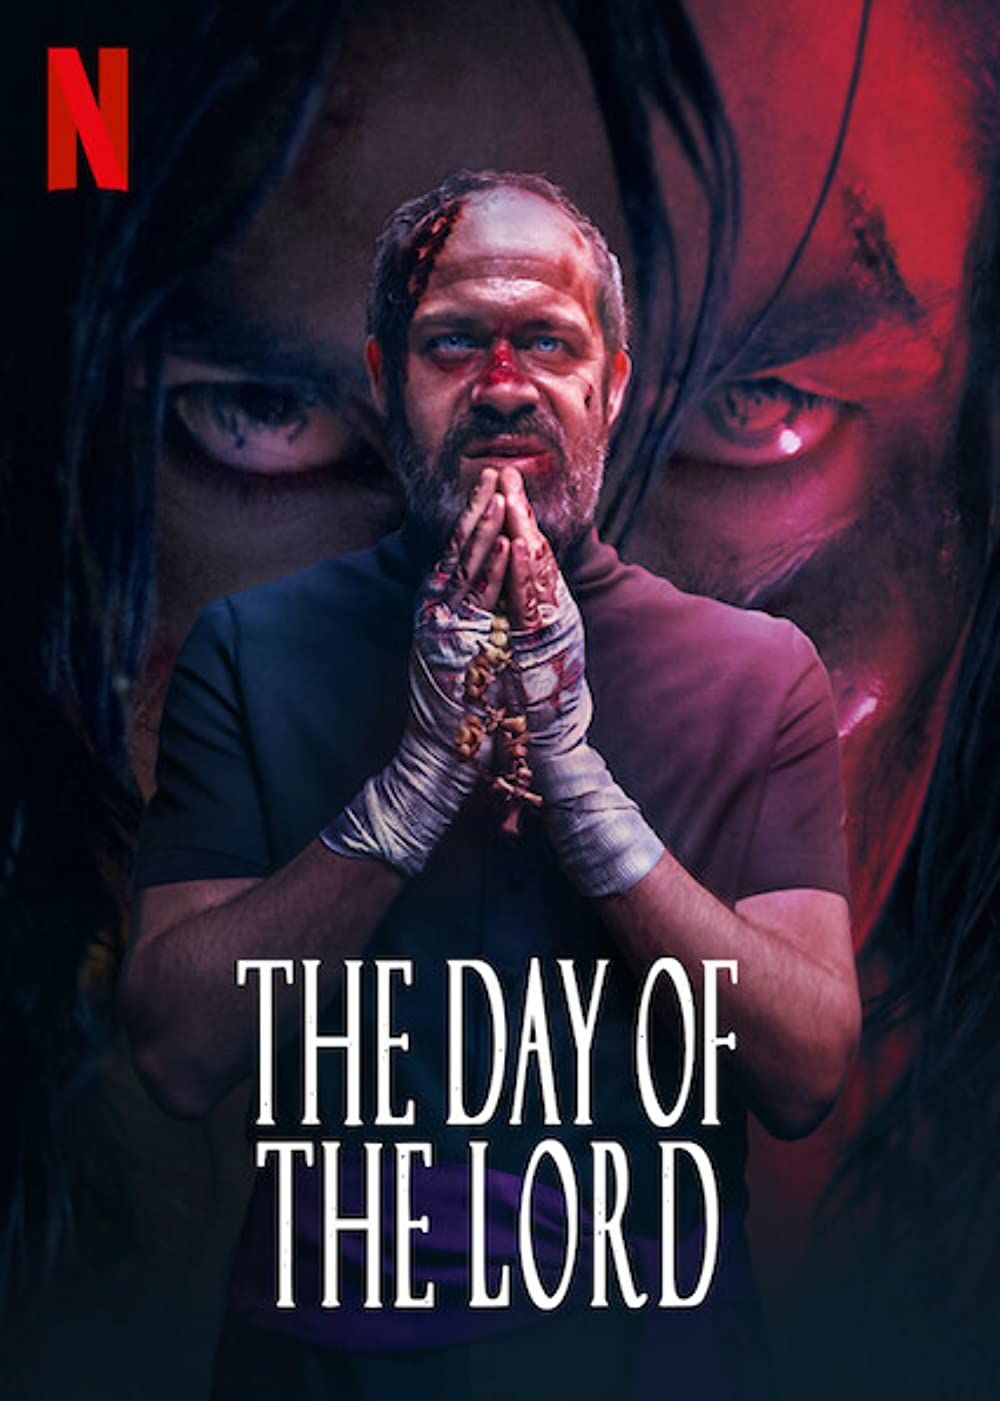  The Day of the Lord (2020) วันปราบผี